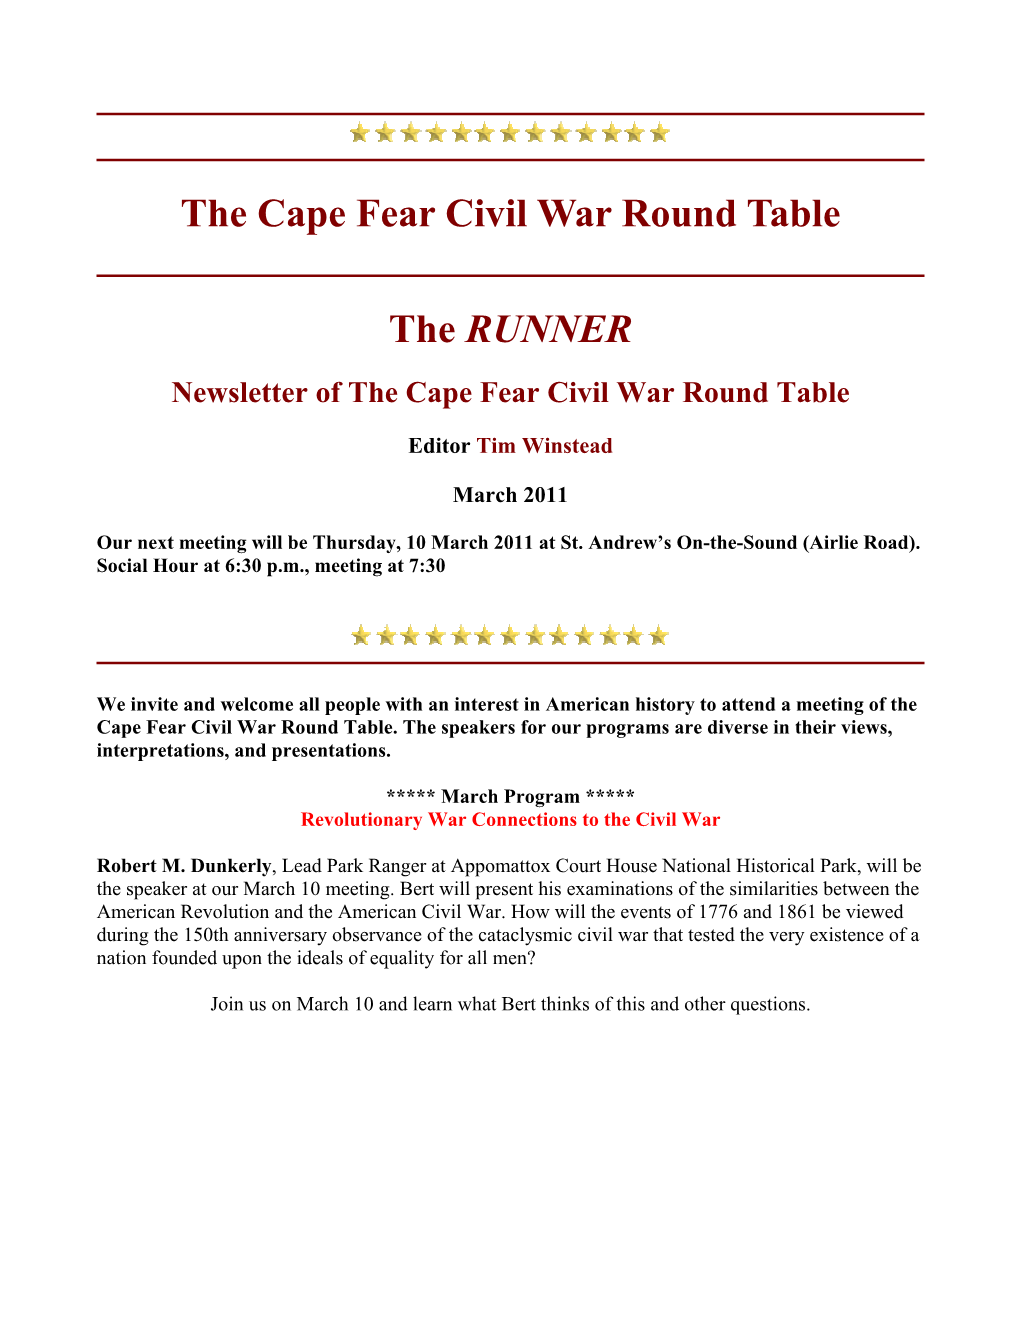 The Cape Fear Civil War Round Table the RUNNER